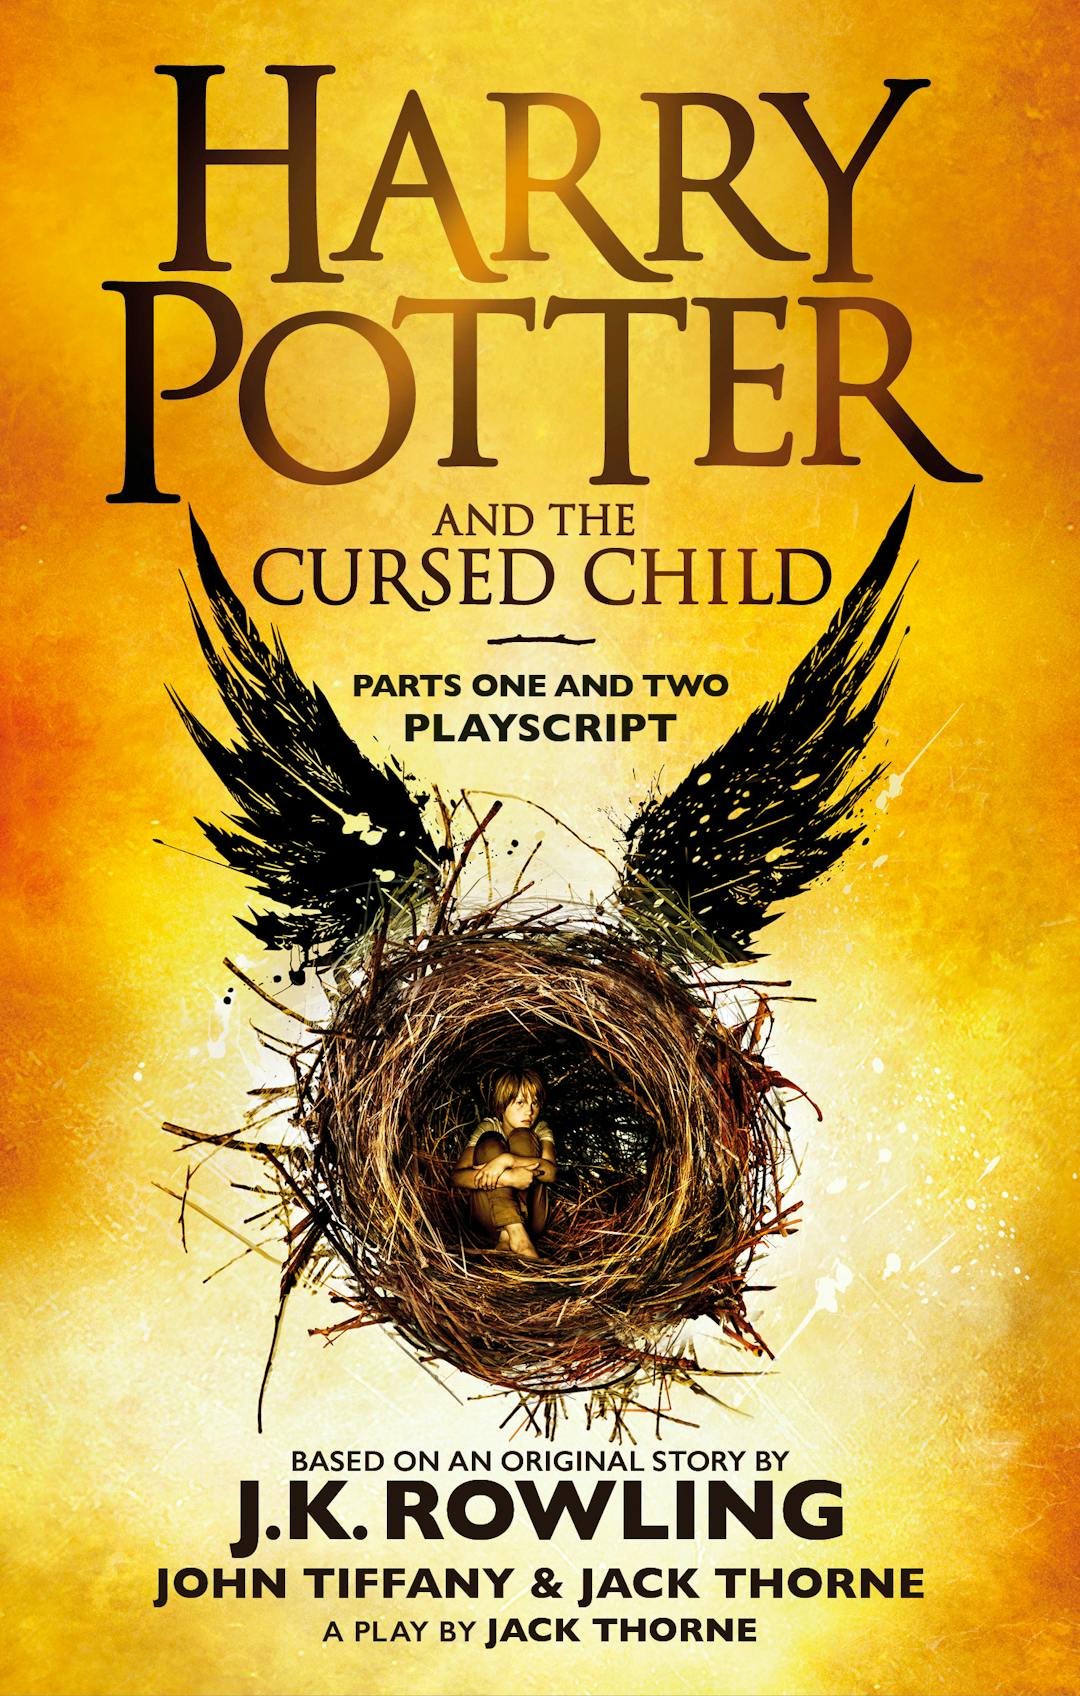 Harry Potter and the Cursed Child, by J.K. Rowling, John Tiffany, Jack Thorne